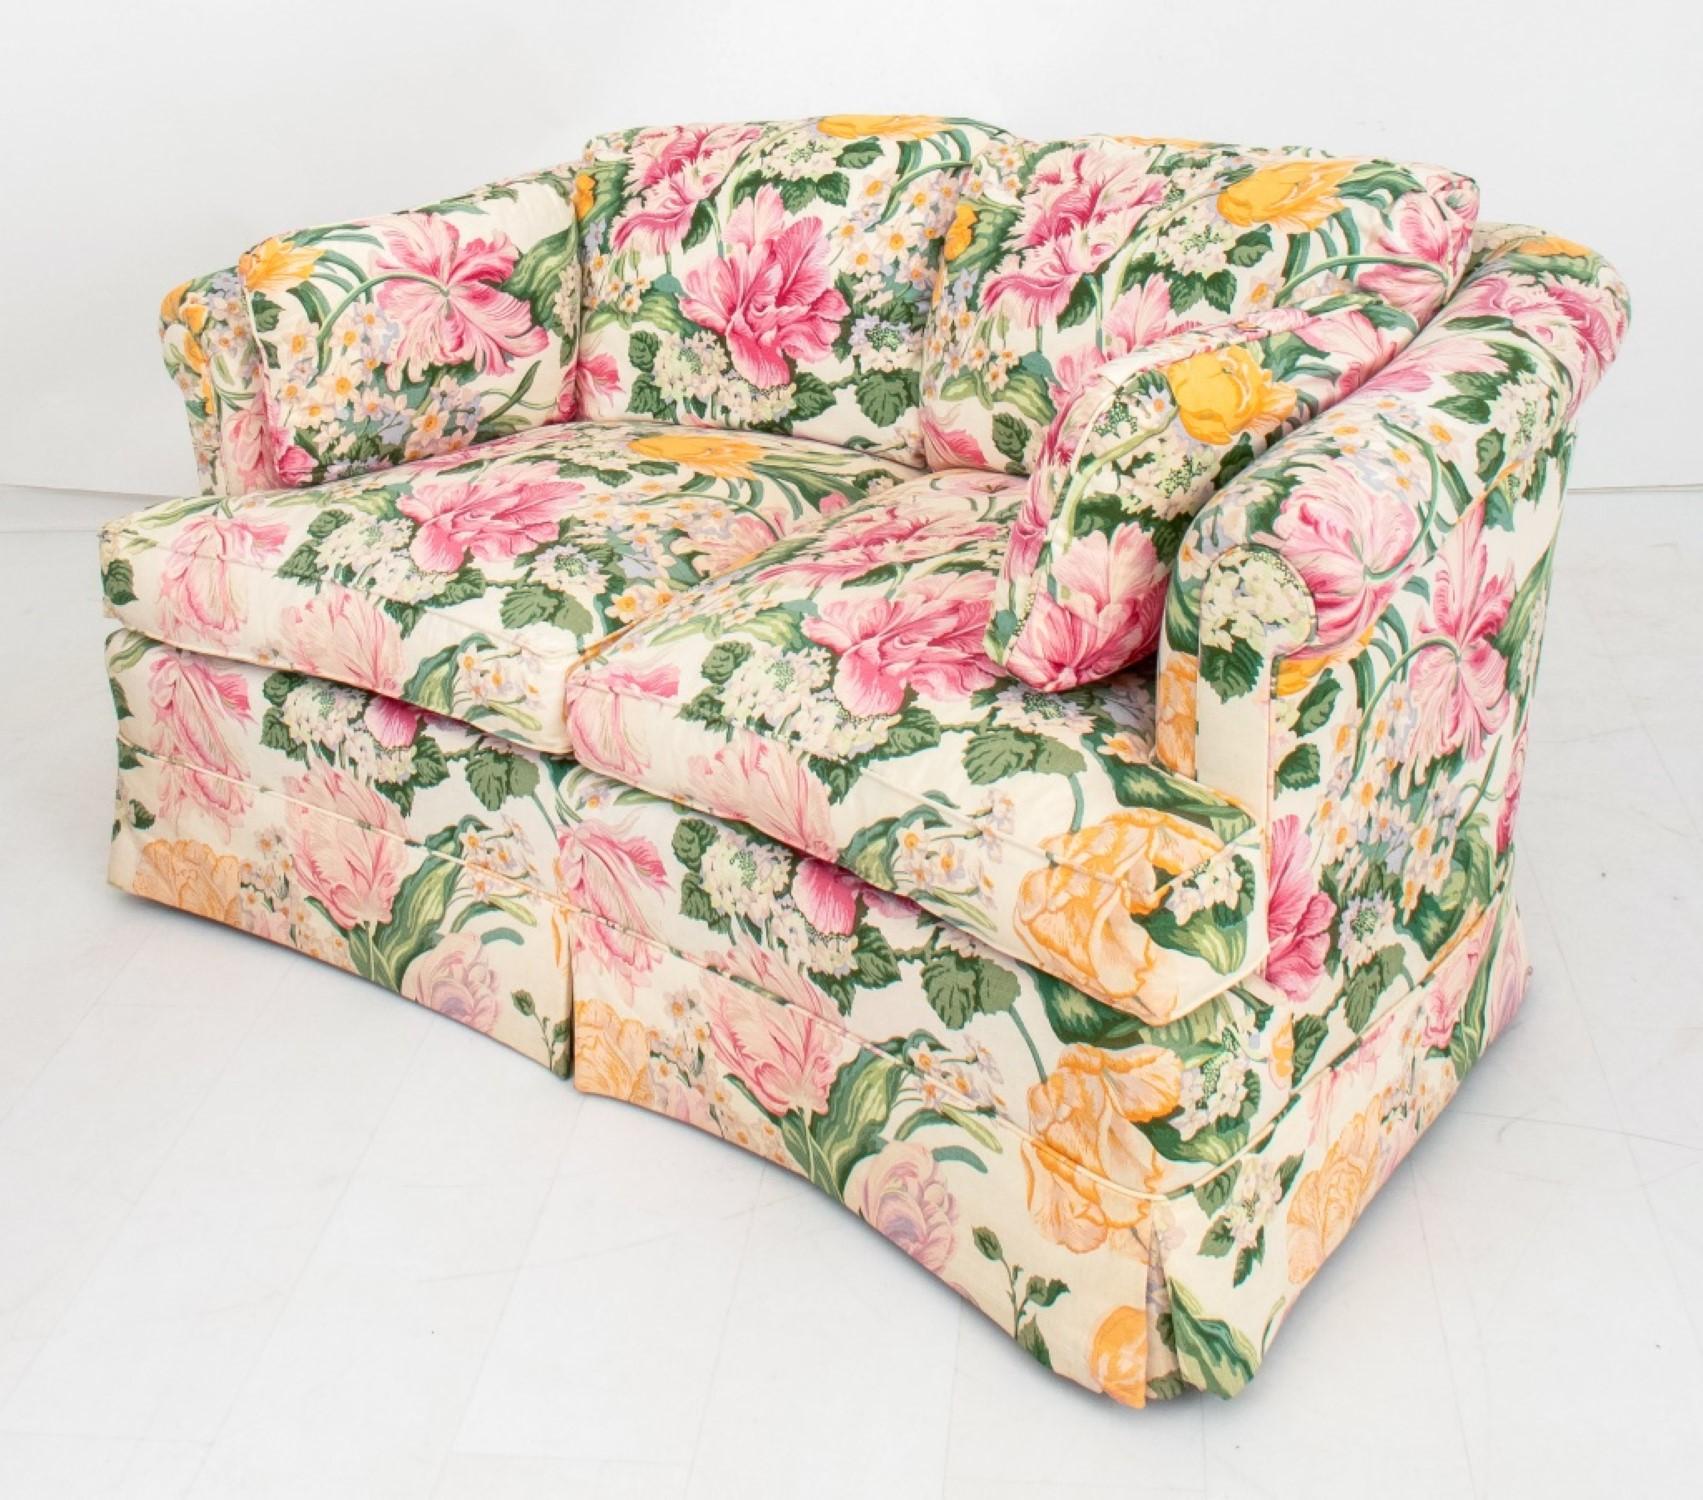 Upholstery Floral Chintz Slipcovered Upholstered Sofa For Sale